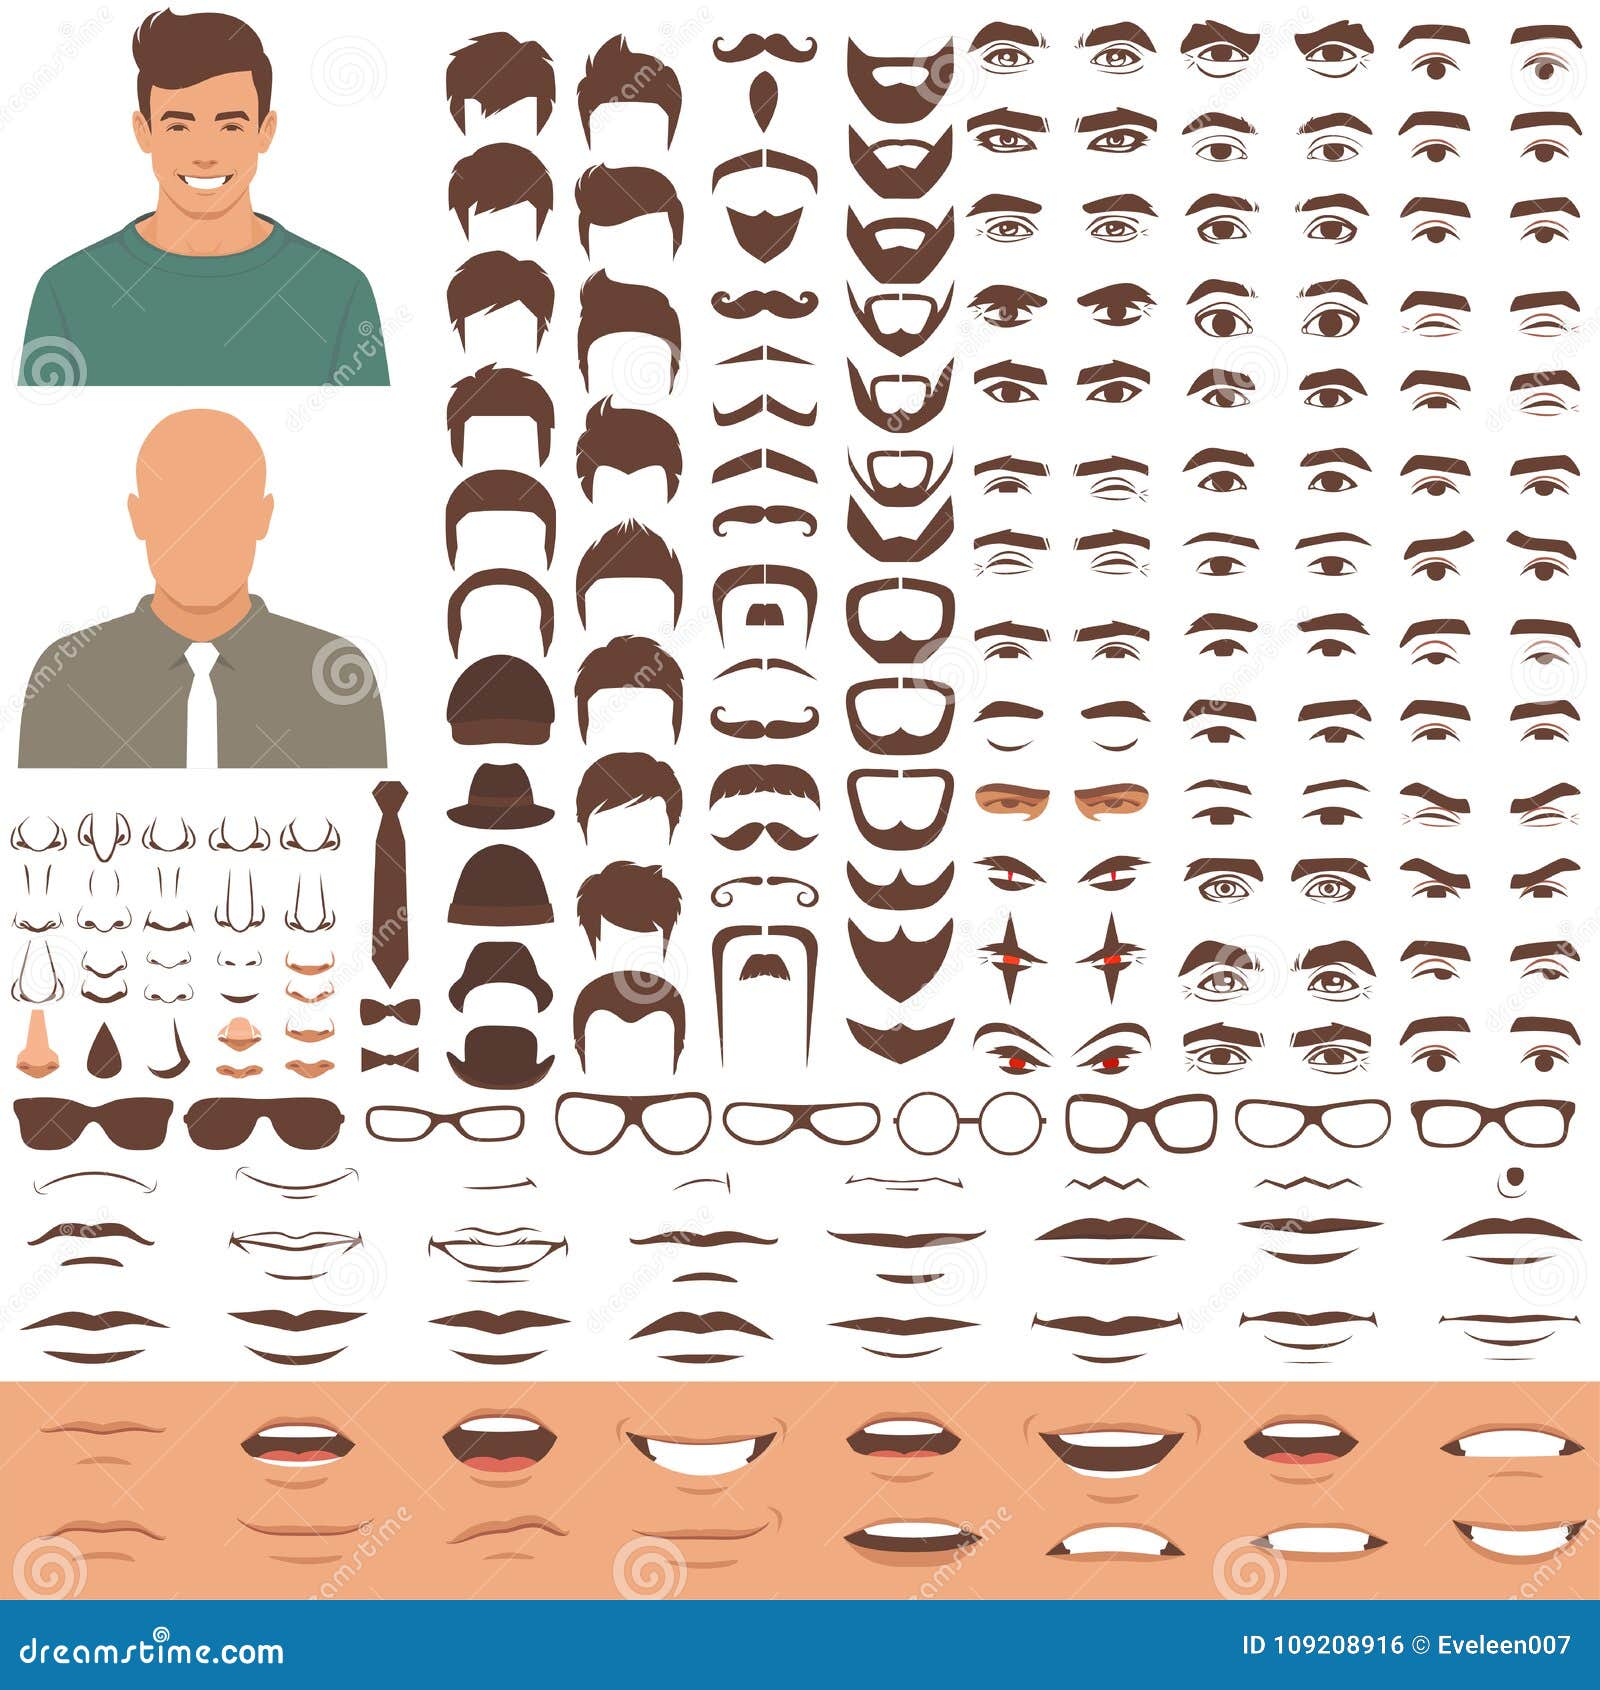 man face parts, character head, eyes, mouth, lips, hair and eyebrow icon set